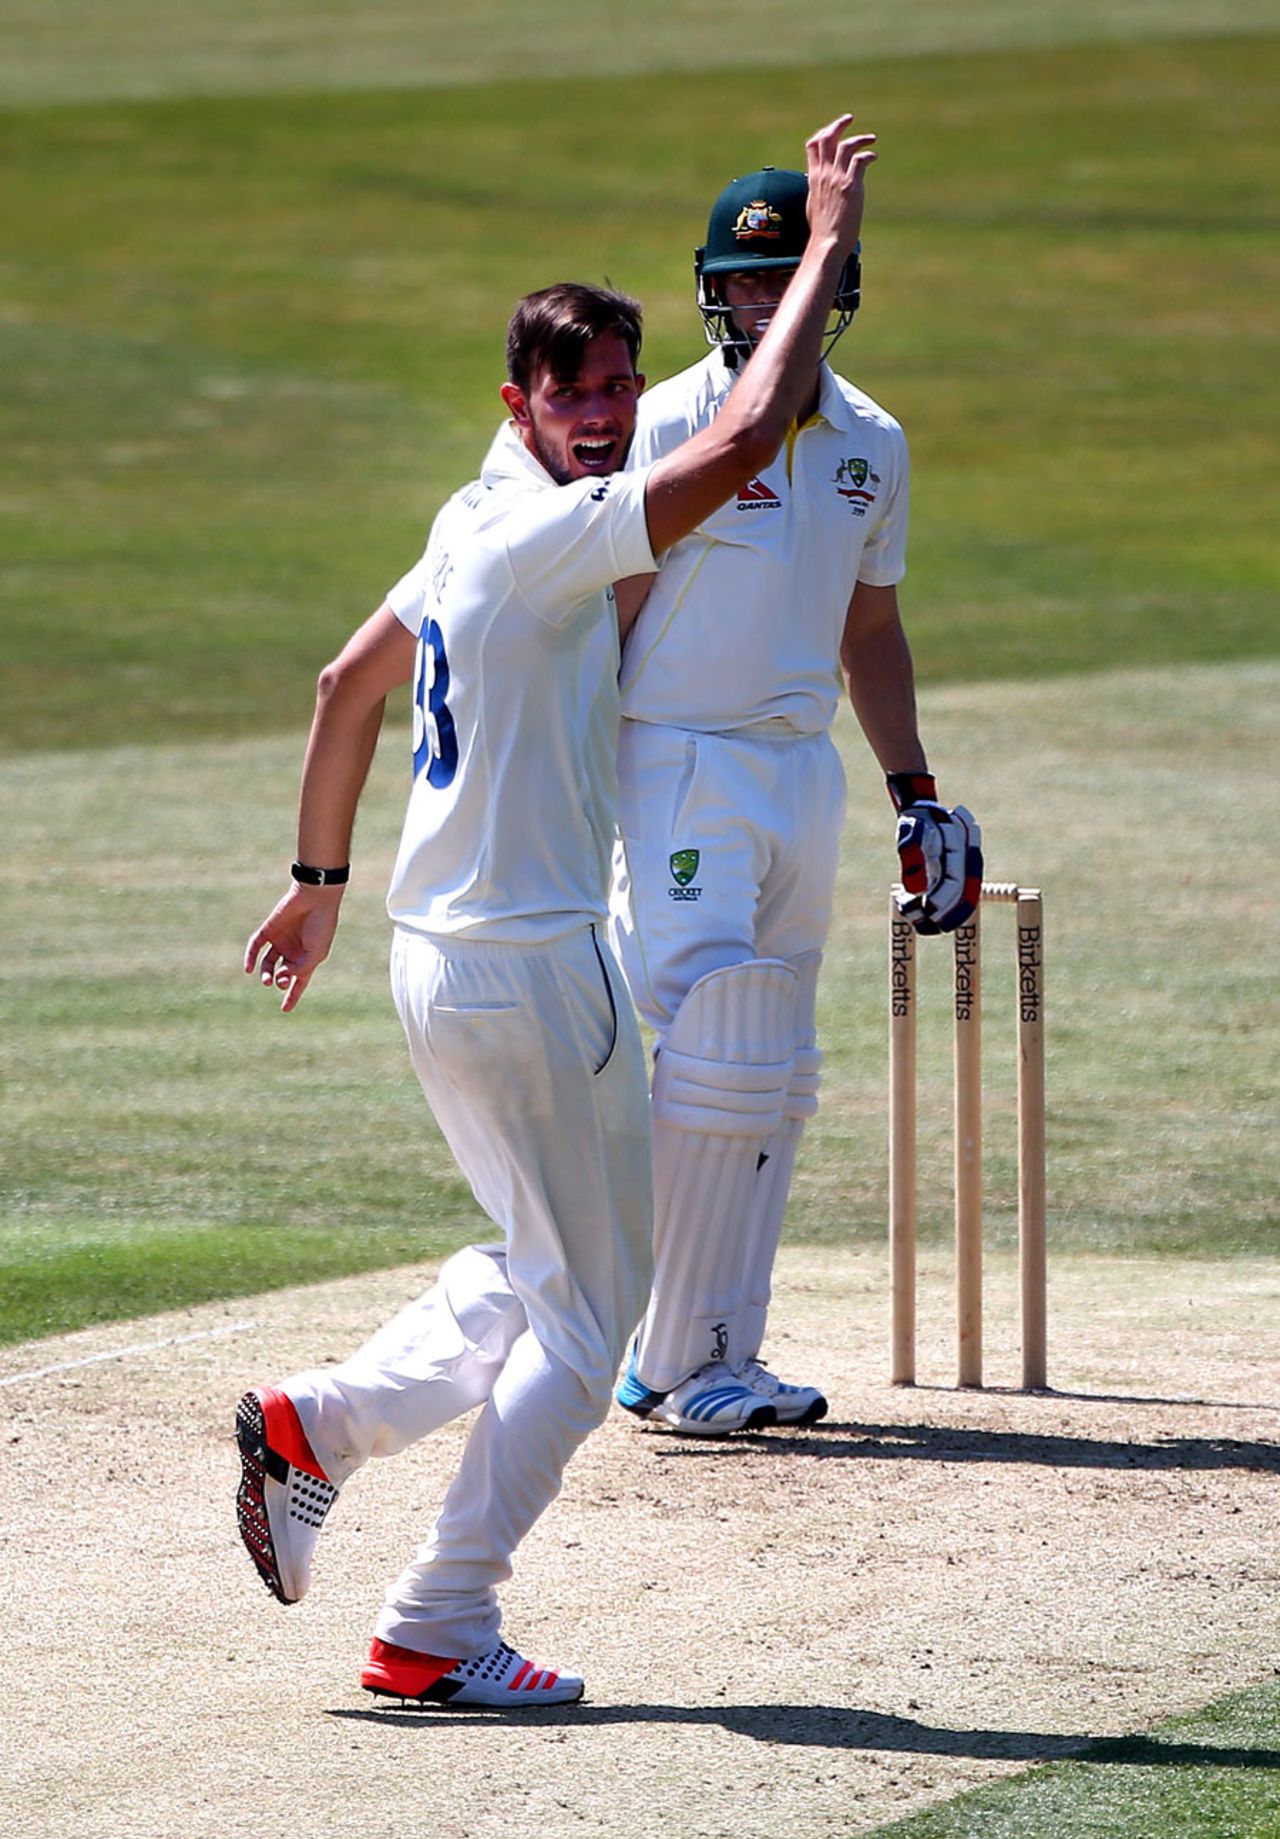 Thomas Moore picked up two wickets in two balls, Essex v Australians, Tour match, Chelmsford, 1st day, July 1, 2015